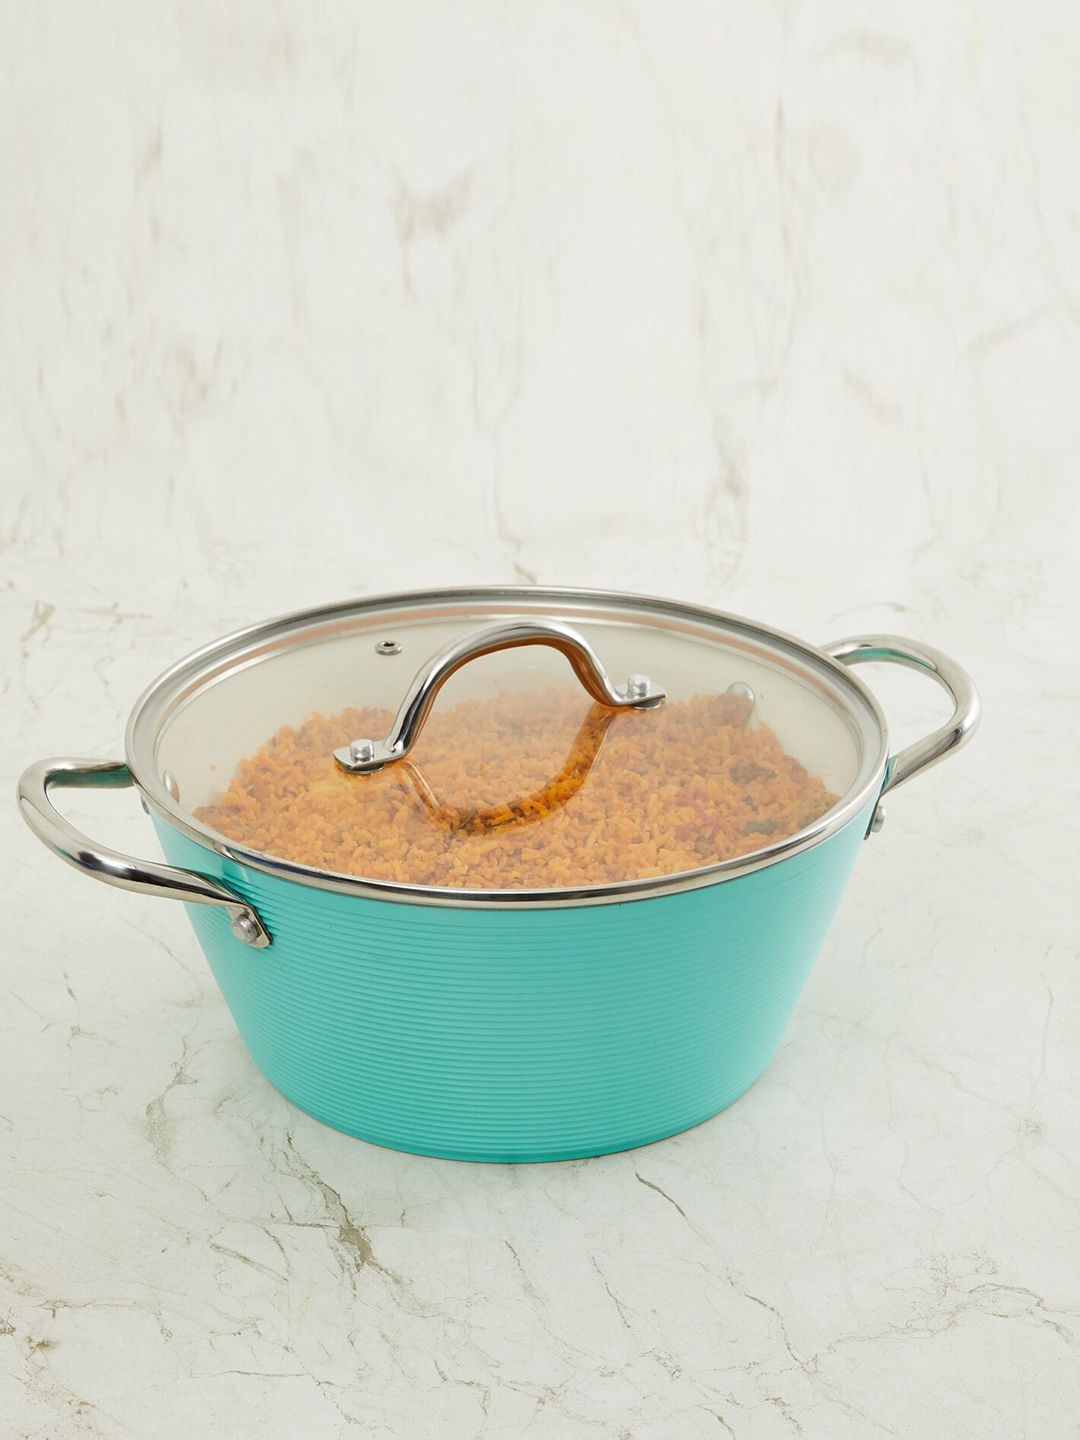 Homecentre White & Turquoise Blue Solid Elite Helix Covered Casserole with Glass Lid Price in India